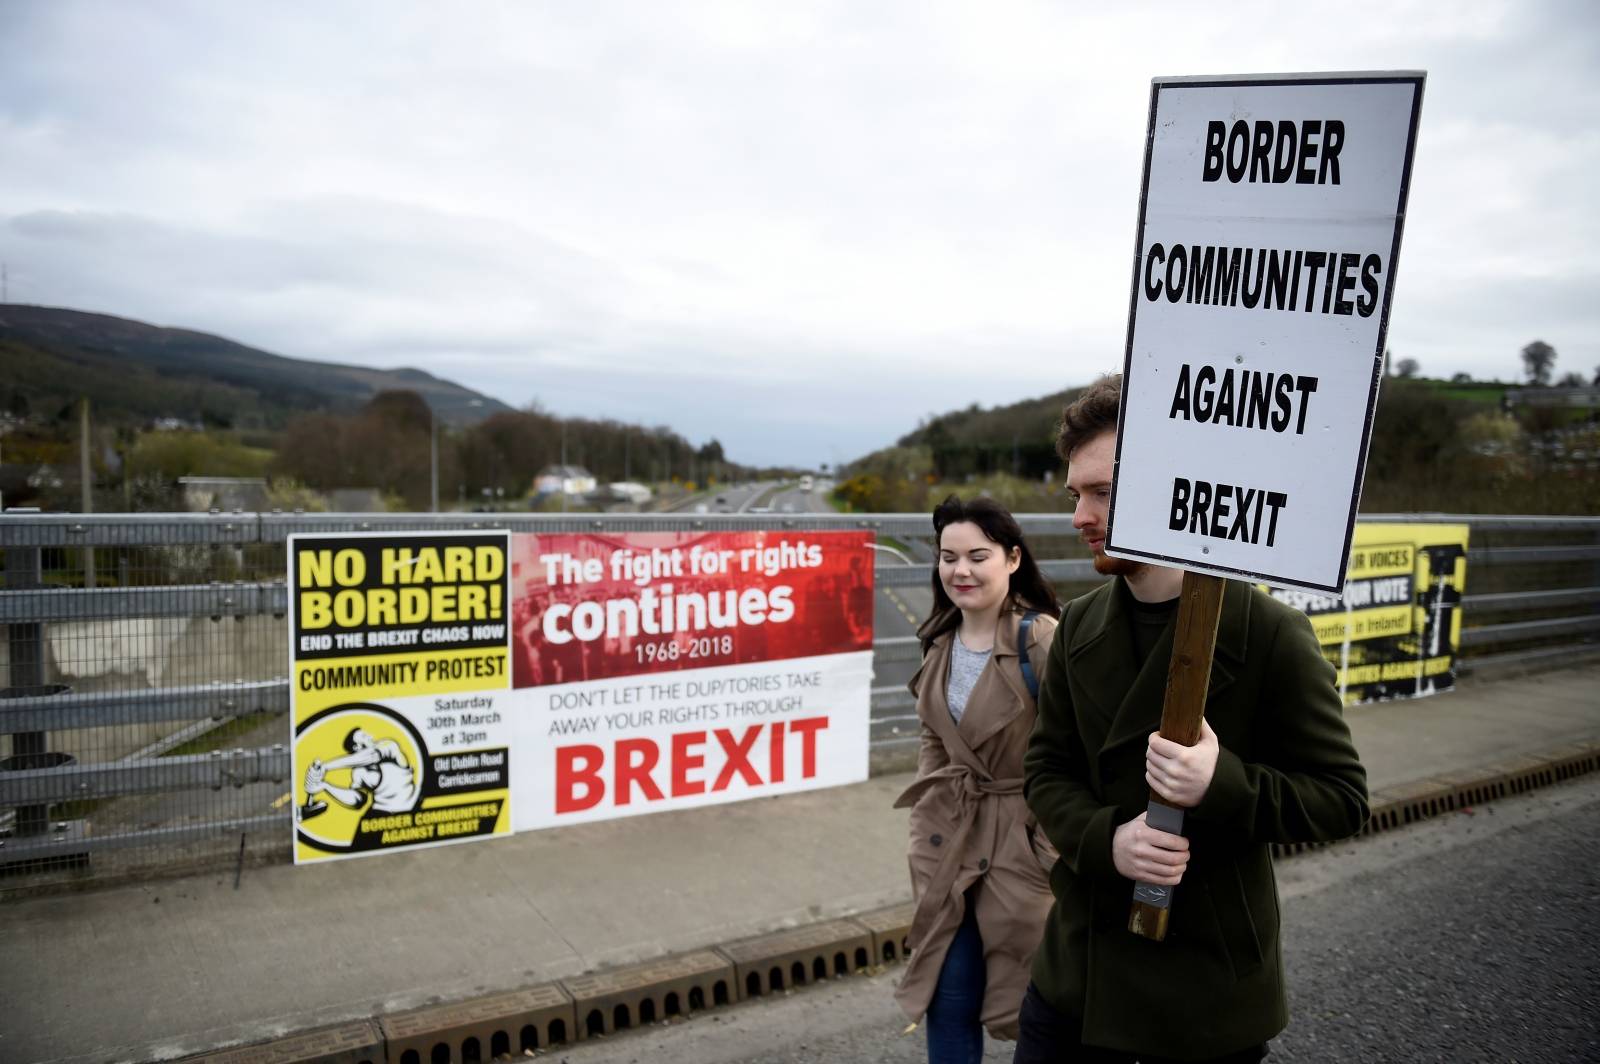 FILE PHOTO: People attend a protest against Brexit at the border crossing between the Republic of Ireland and Northern Ireland in Carrickcarnon